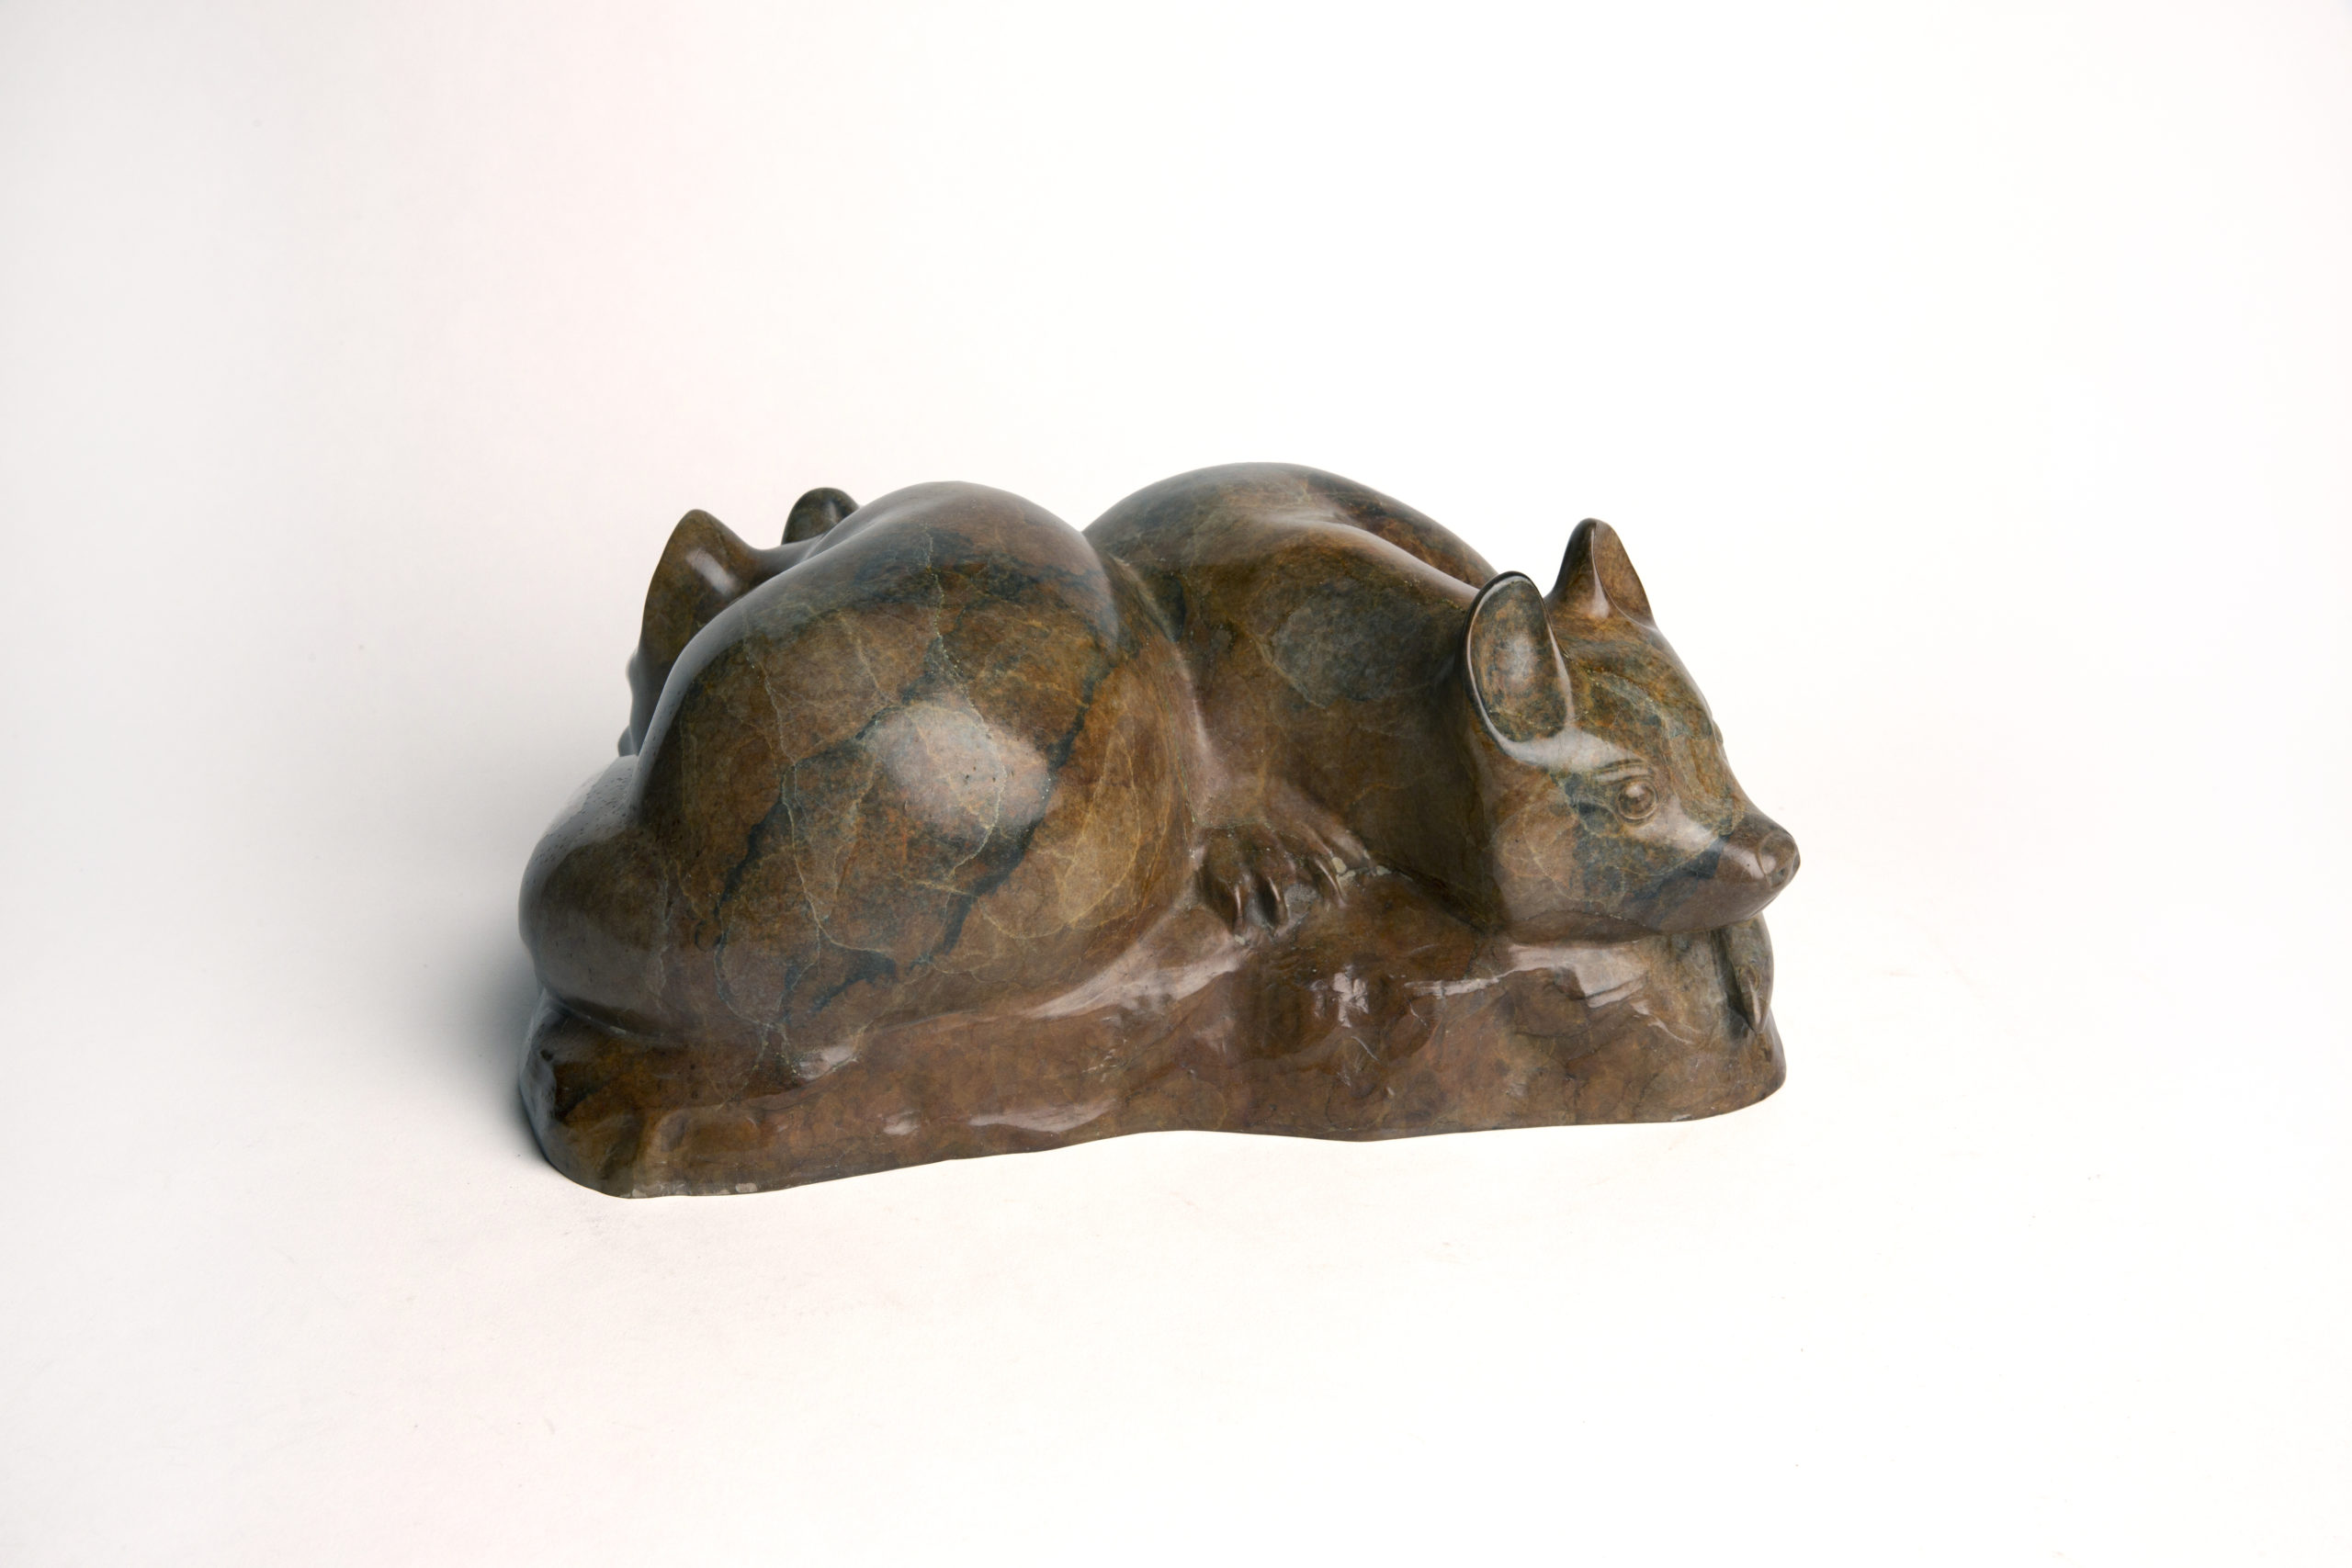 
							

									Tony Angell									Fox Pups 									bronze, 4 3/4 x 12 1/2 x 11 3/4 inches, edition of 6 									


							